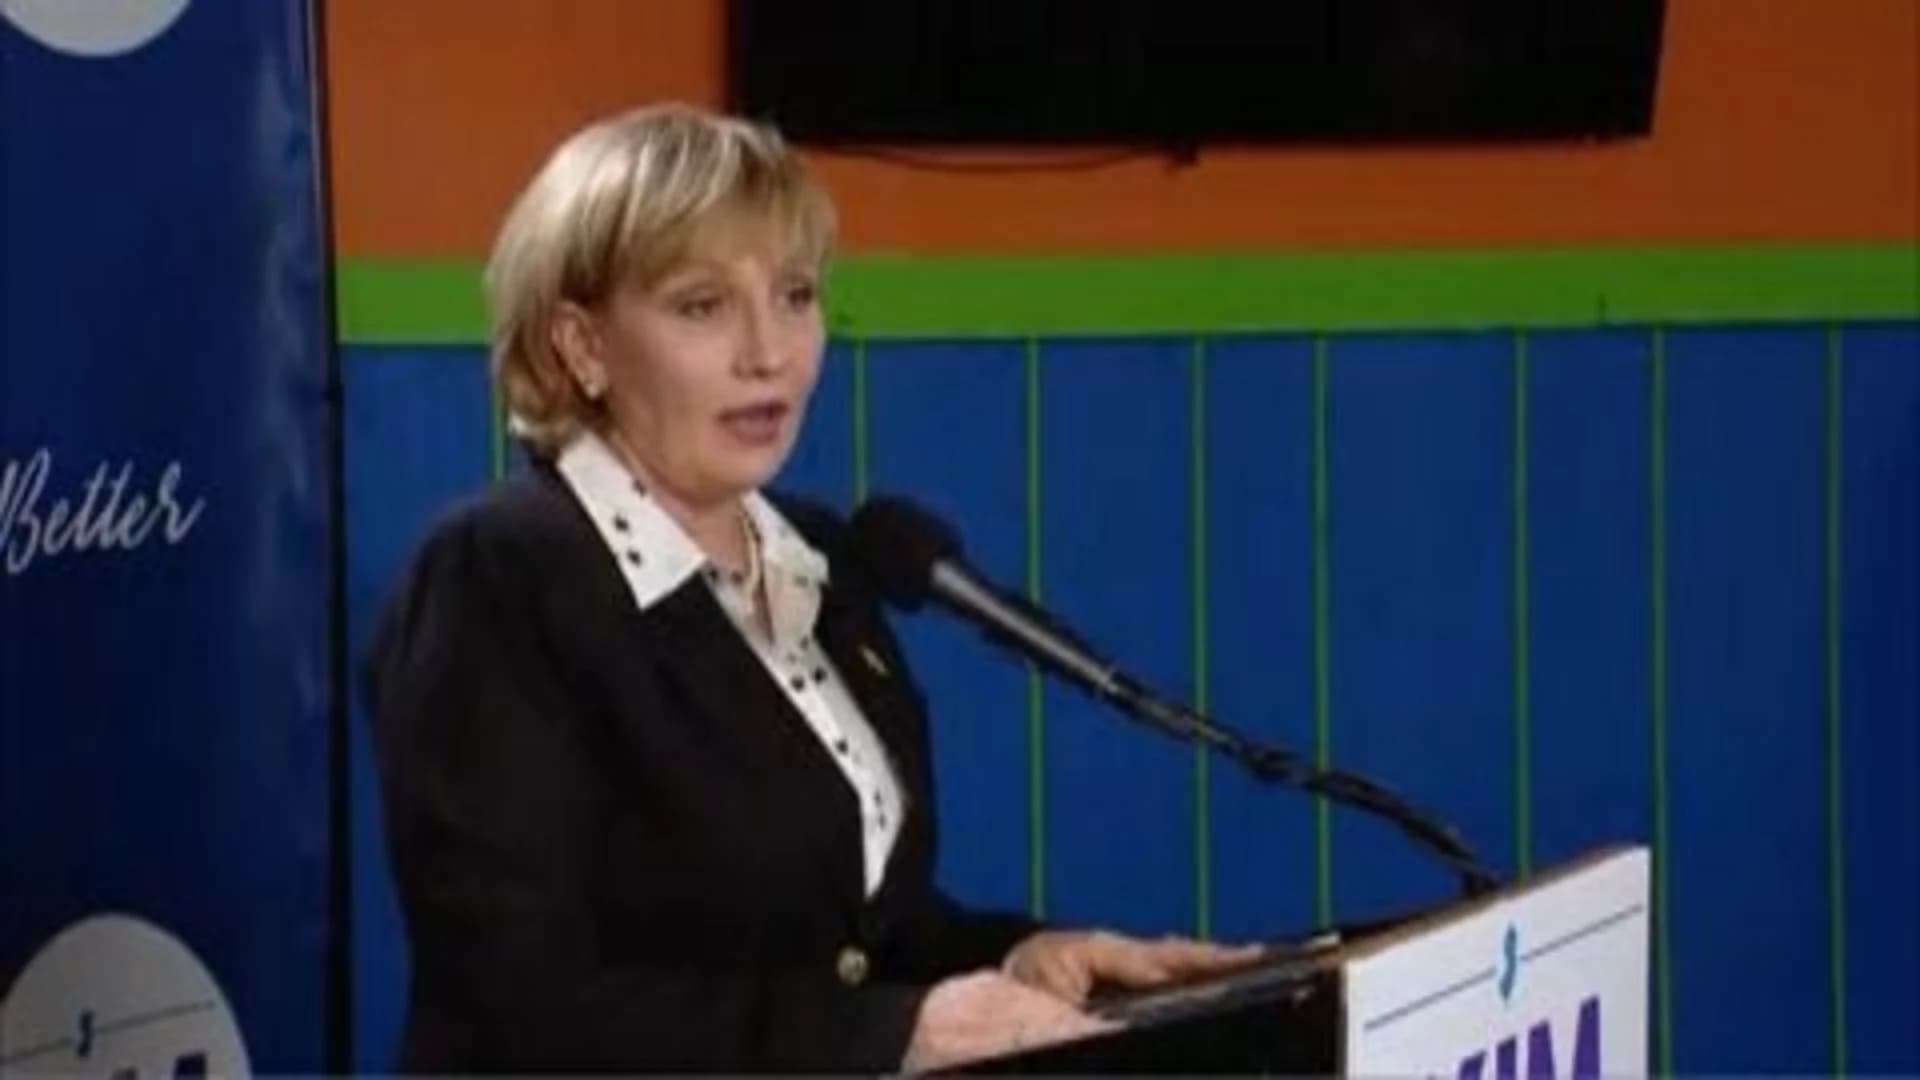 Lt. Gov. Guadagno breaks from campaign trail after her mother’s death